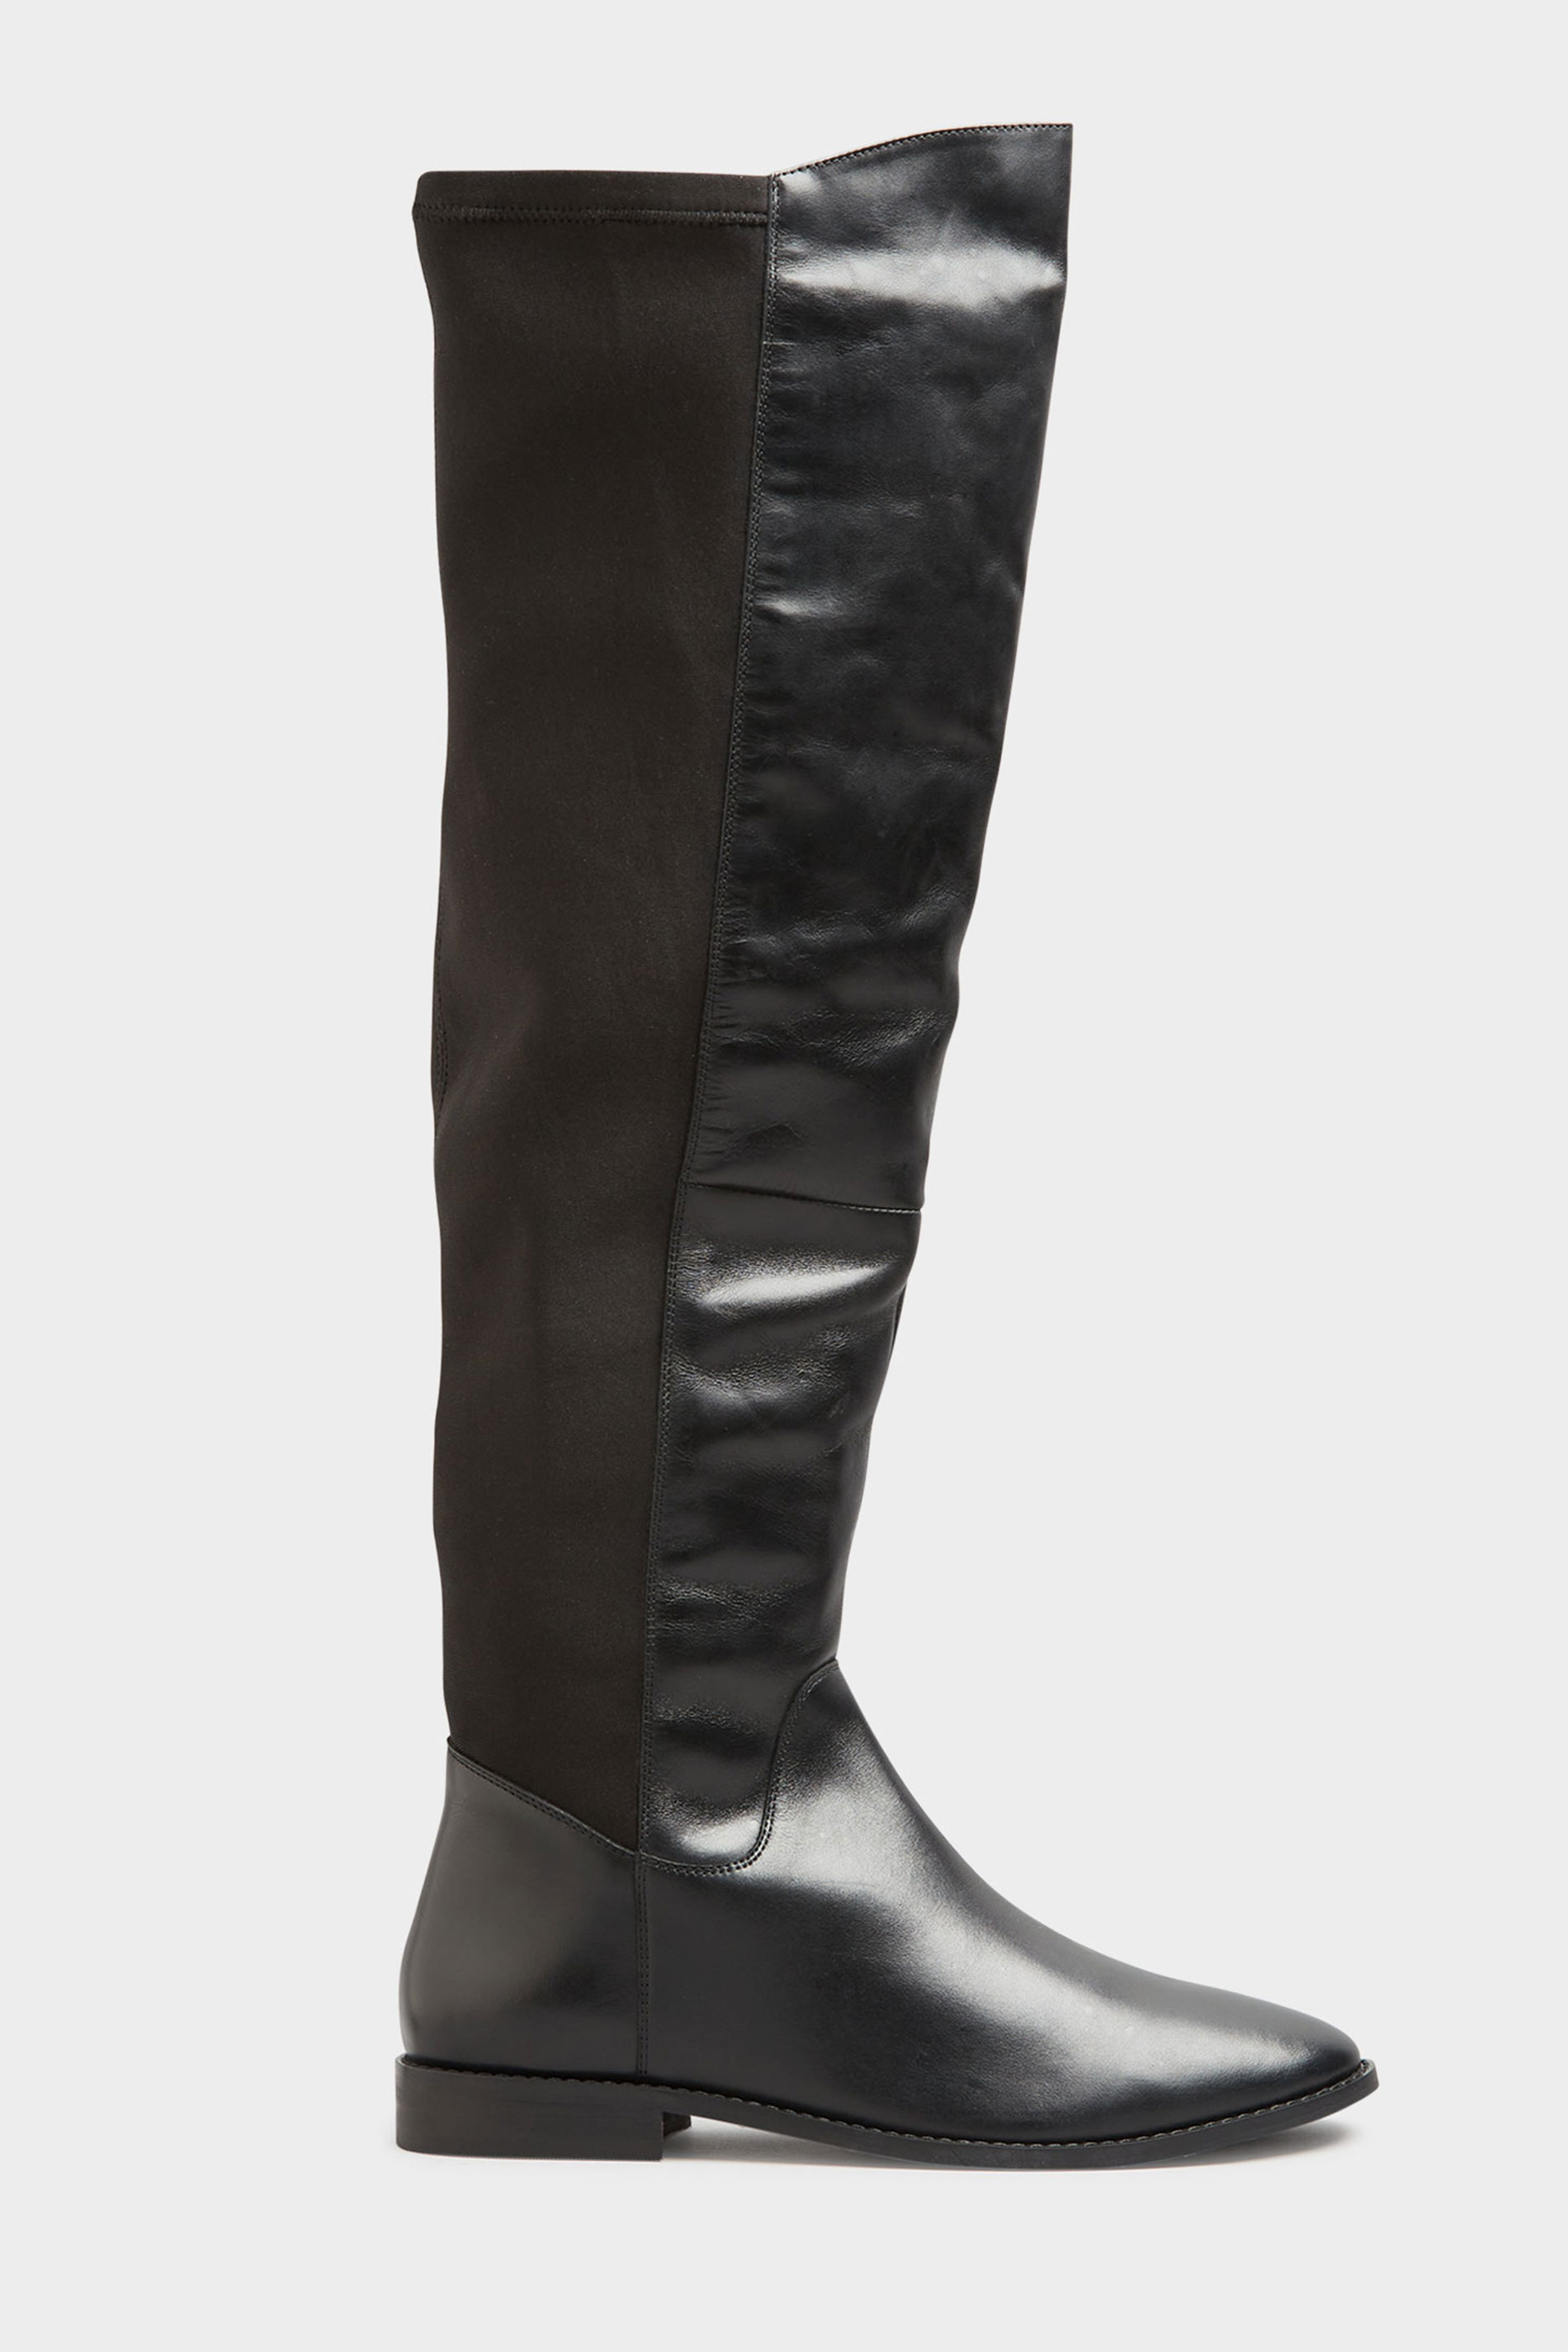 LTS Black Leather Stretch Knee High Boots In Standard Fit | Long Tall Sally  3